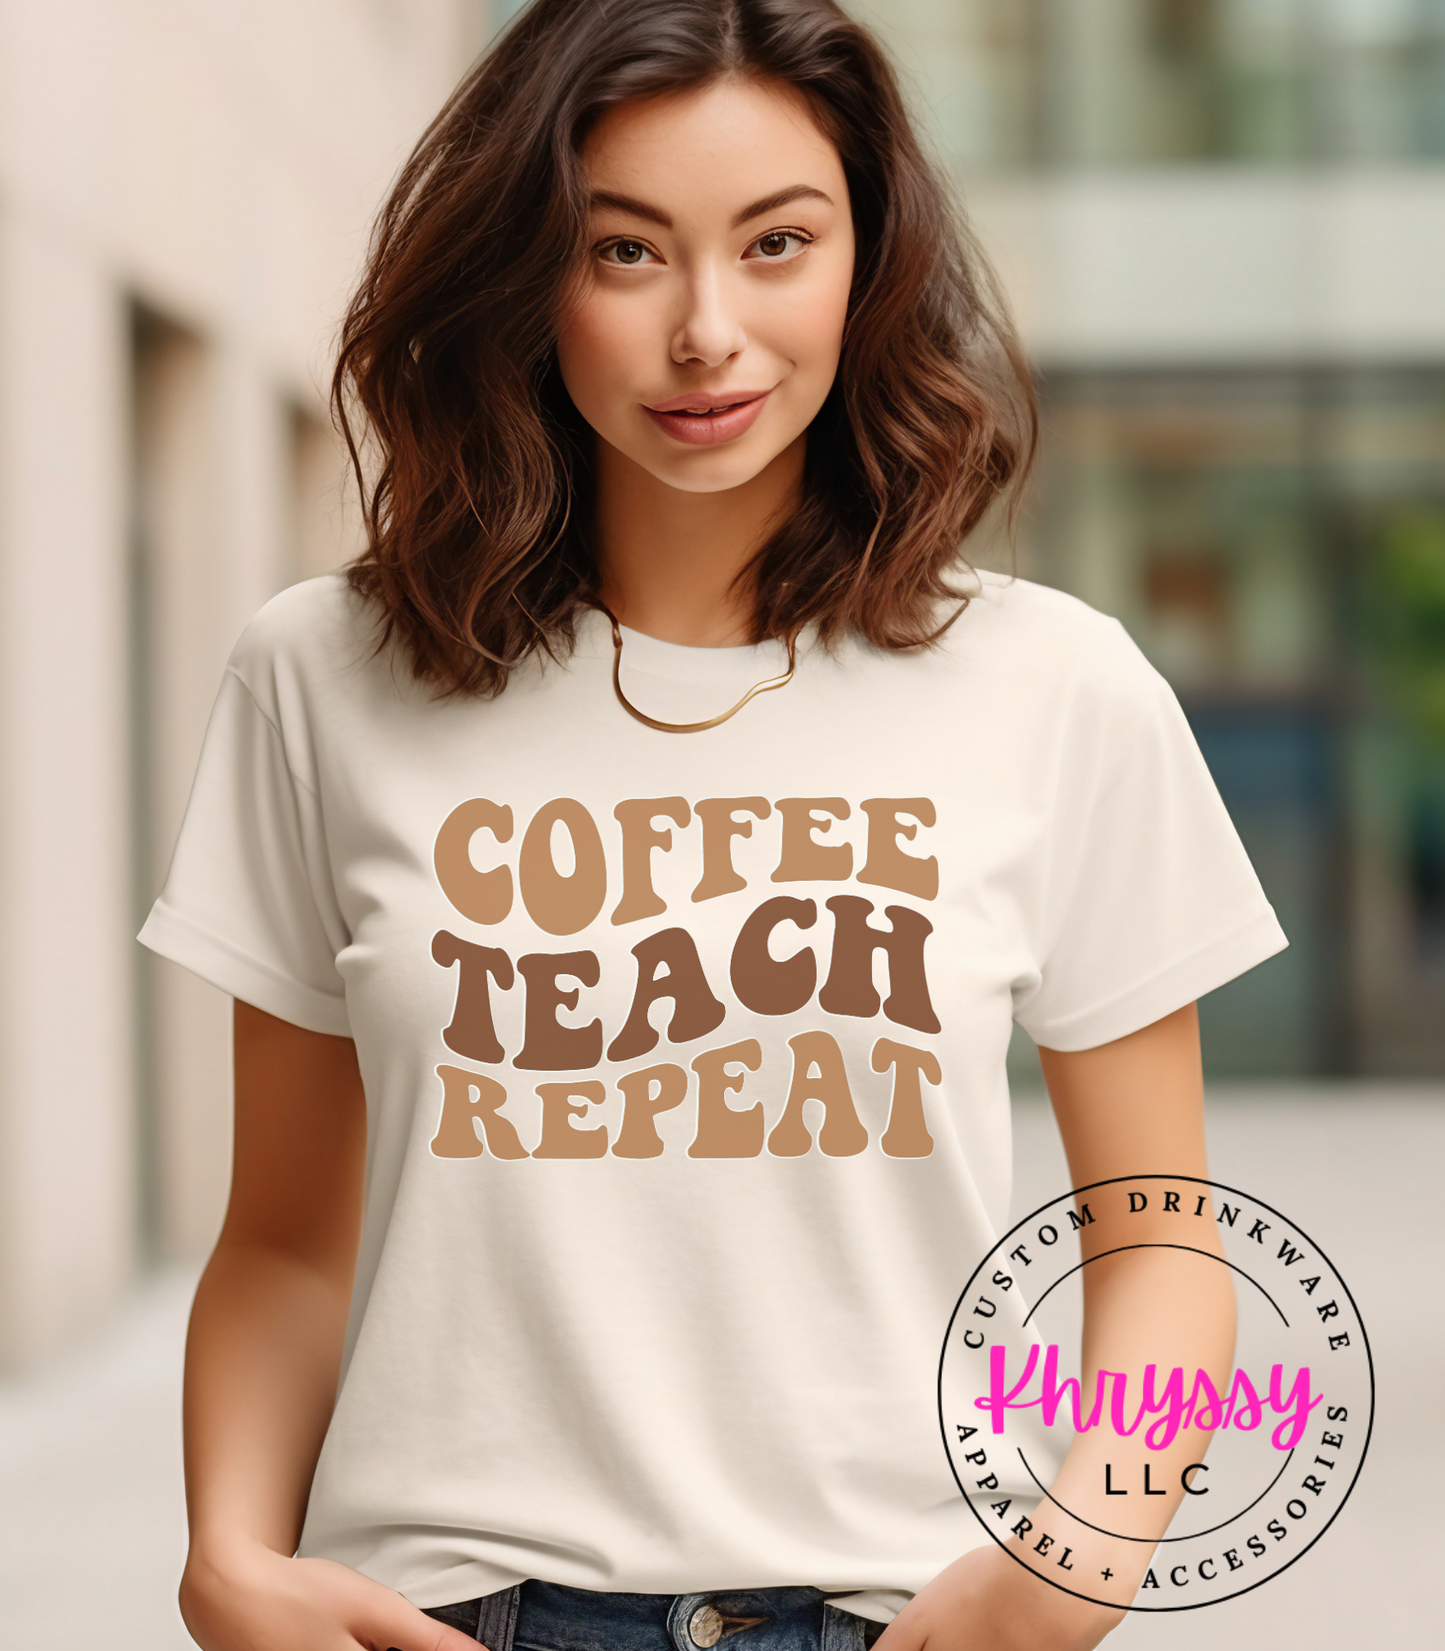 Coffee, Teach, Repeat Shirt: Fuel Your Passion for Education!